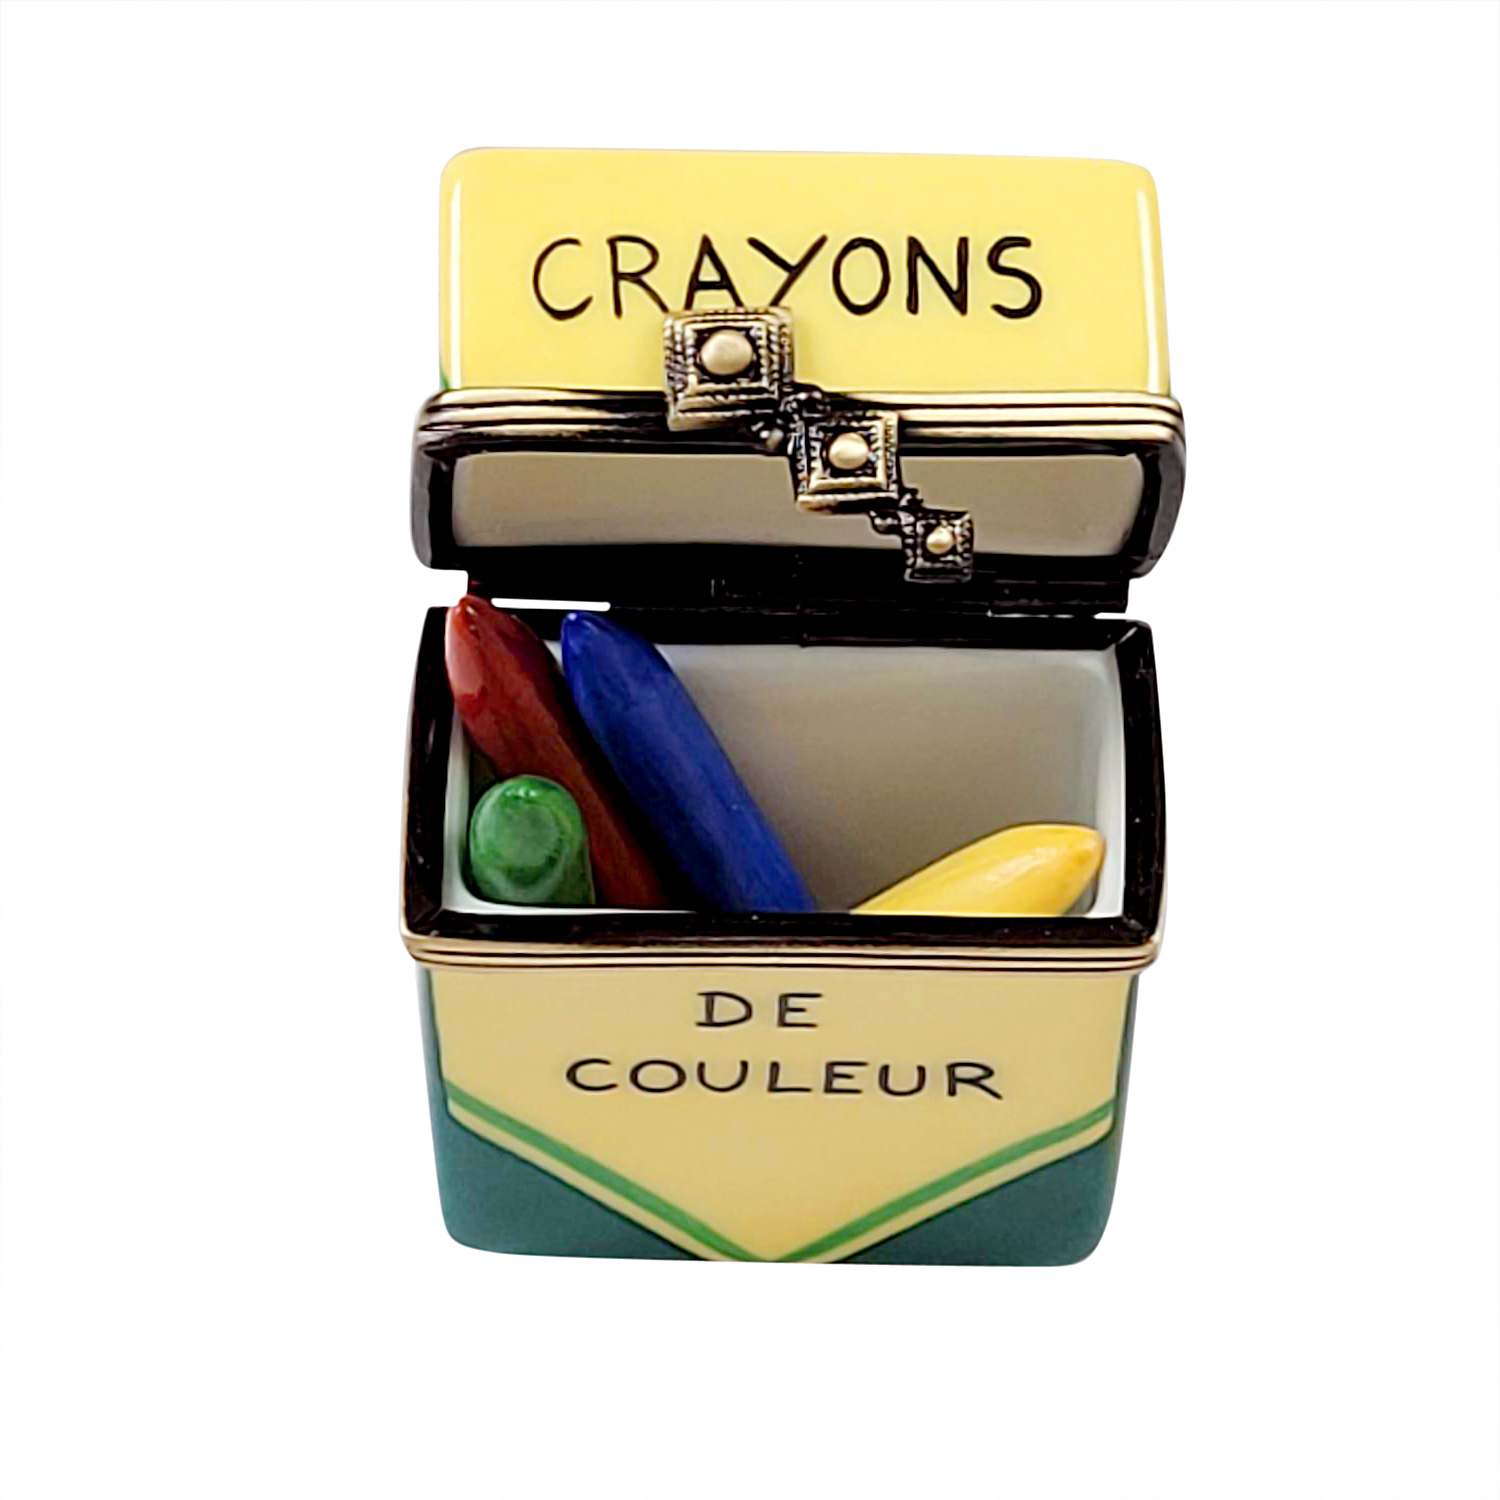 Crayon Box With Removable Crayons